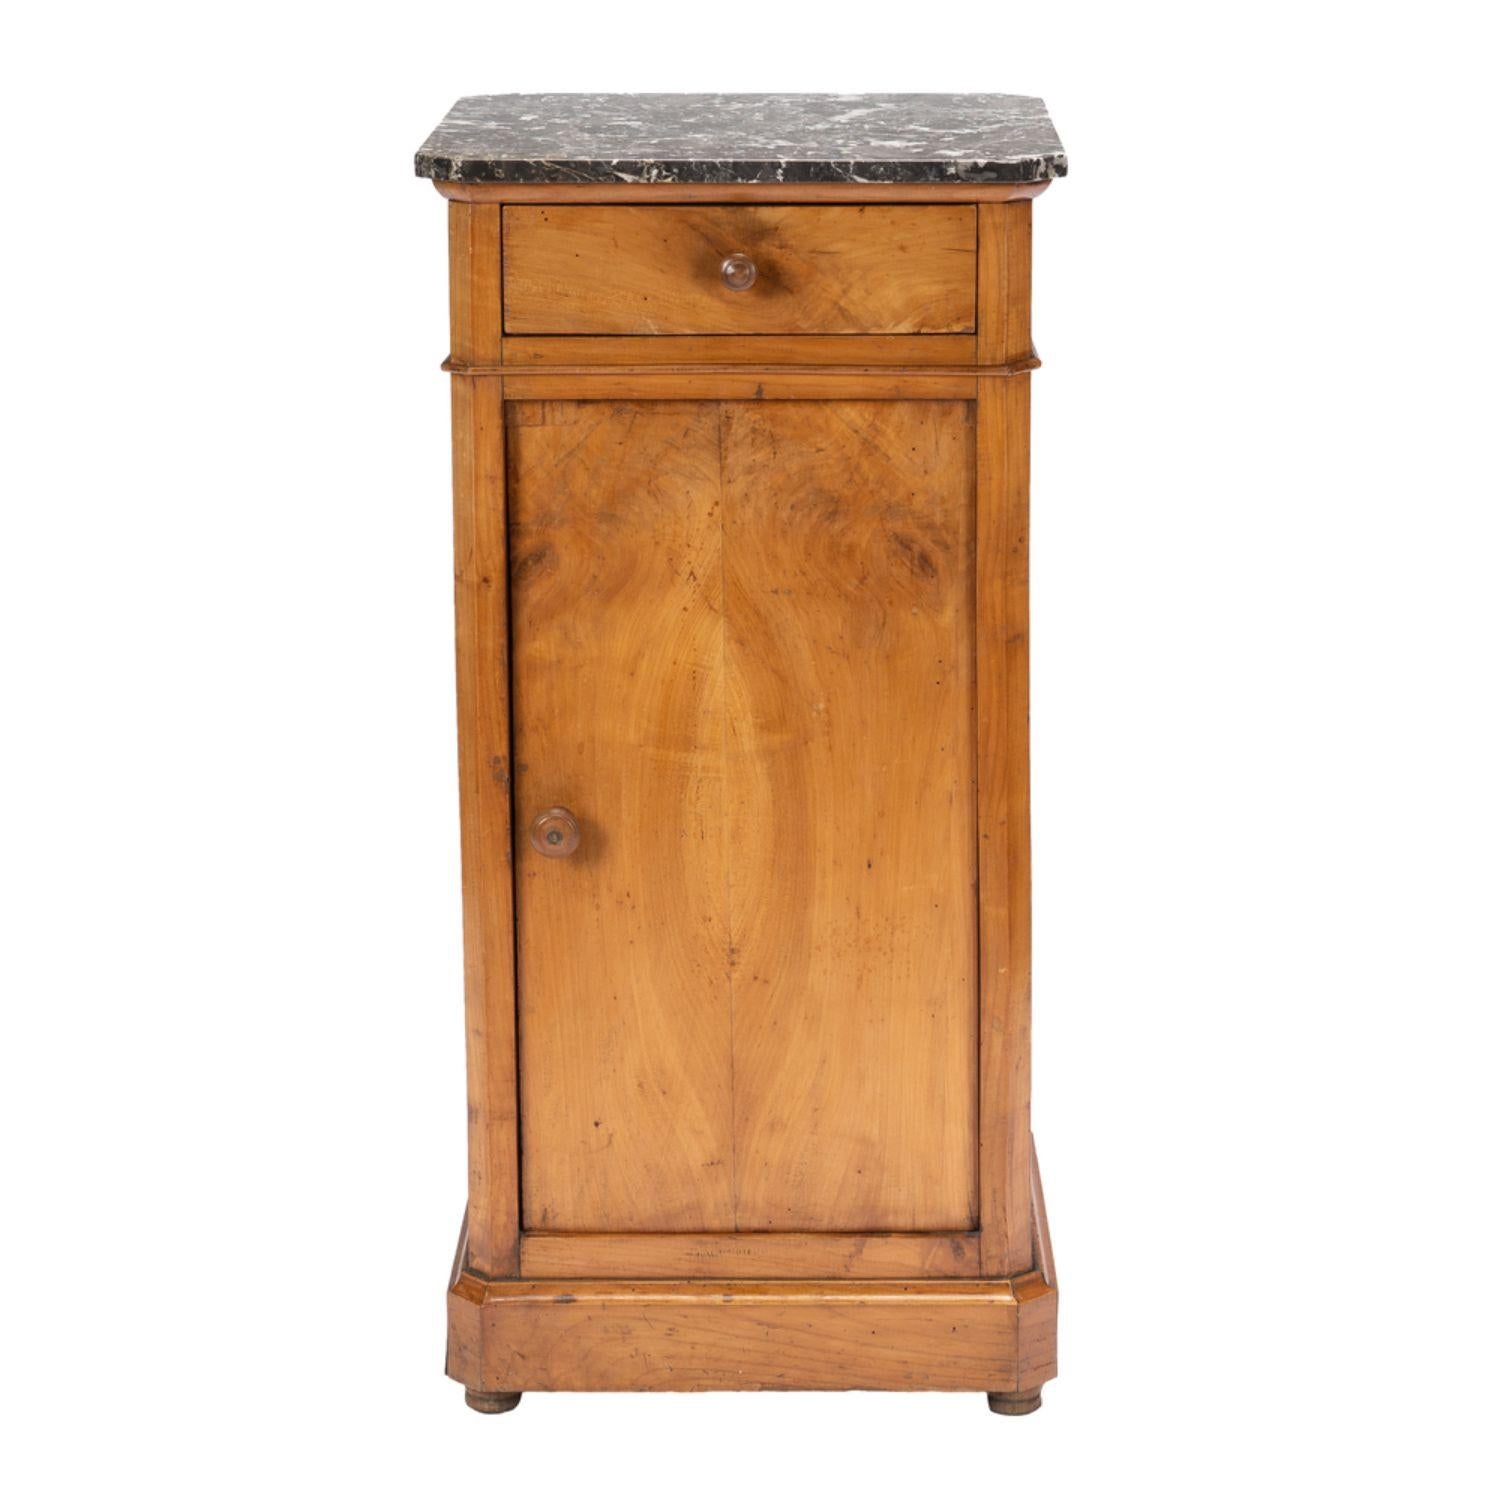 French cherry wood chevet with original gray & white Saint Anne marble top. The cabinet has one drawer over a single long door, with turned cherry knobs. The commode rests on a square molding cut corner base on castors
France, 1830-45.